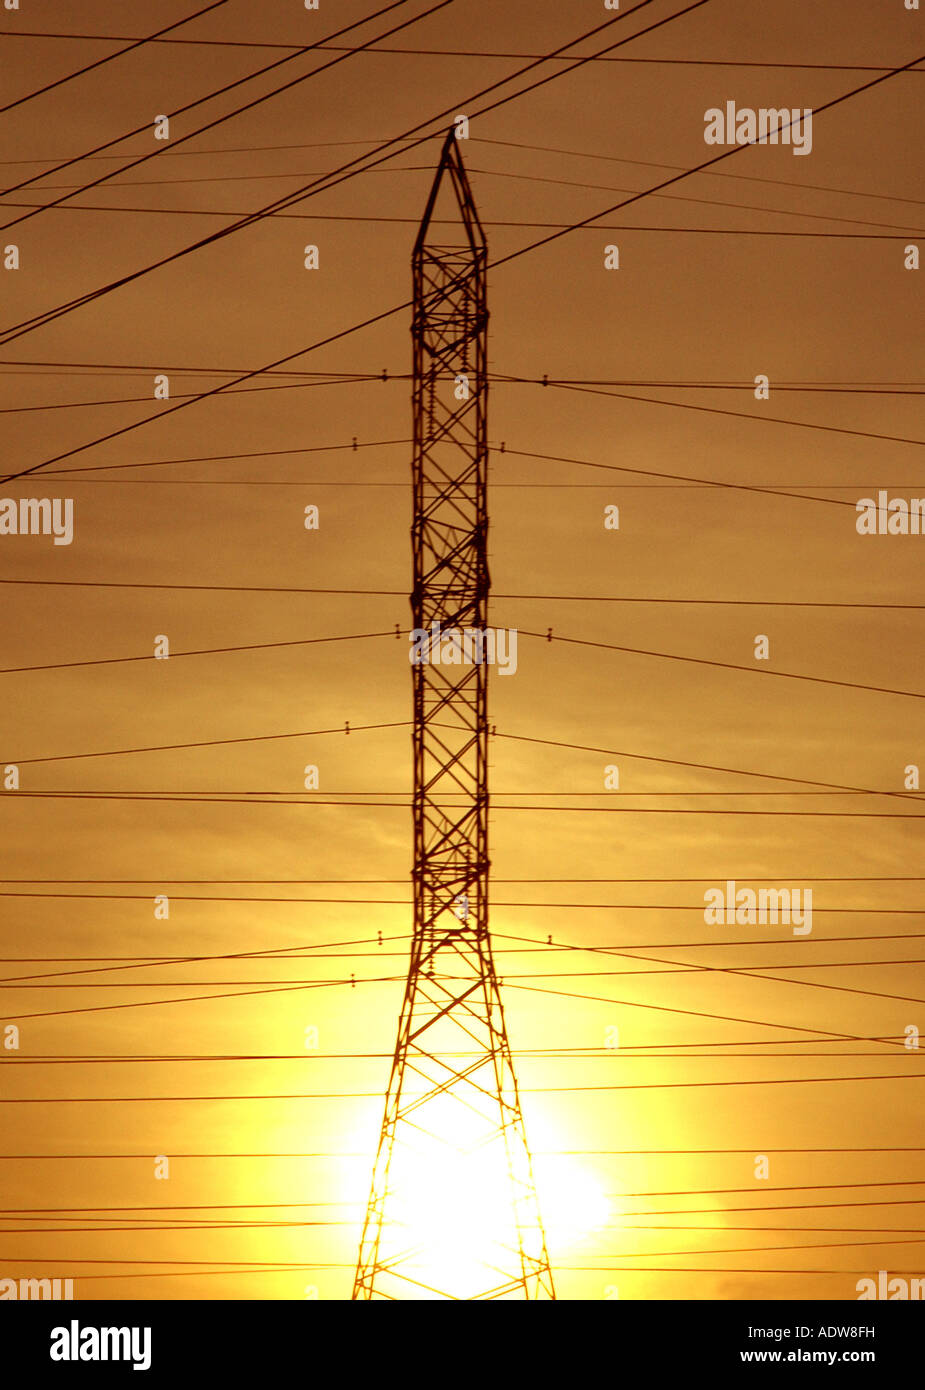 Electricity power tower and transmission lines in the rising sun. Stock Photo